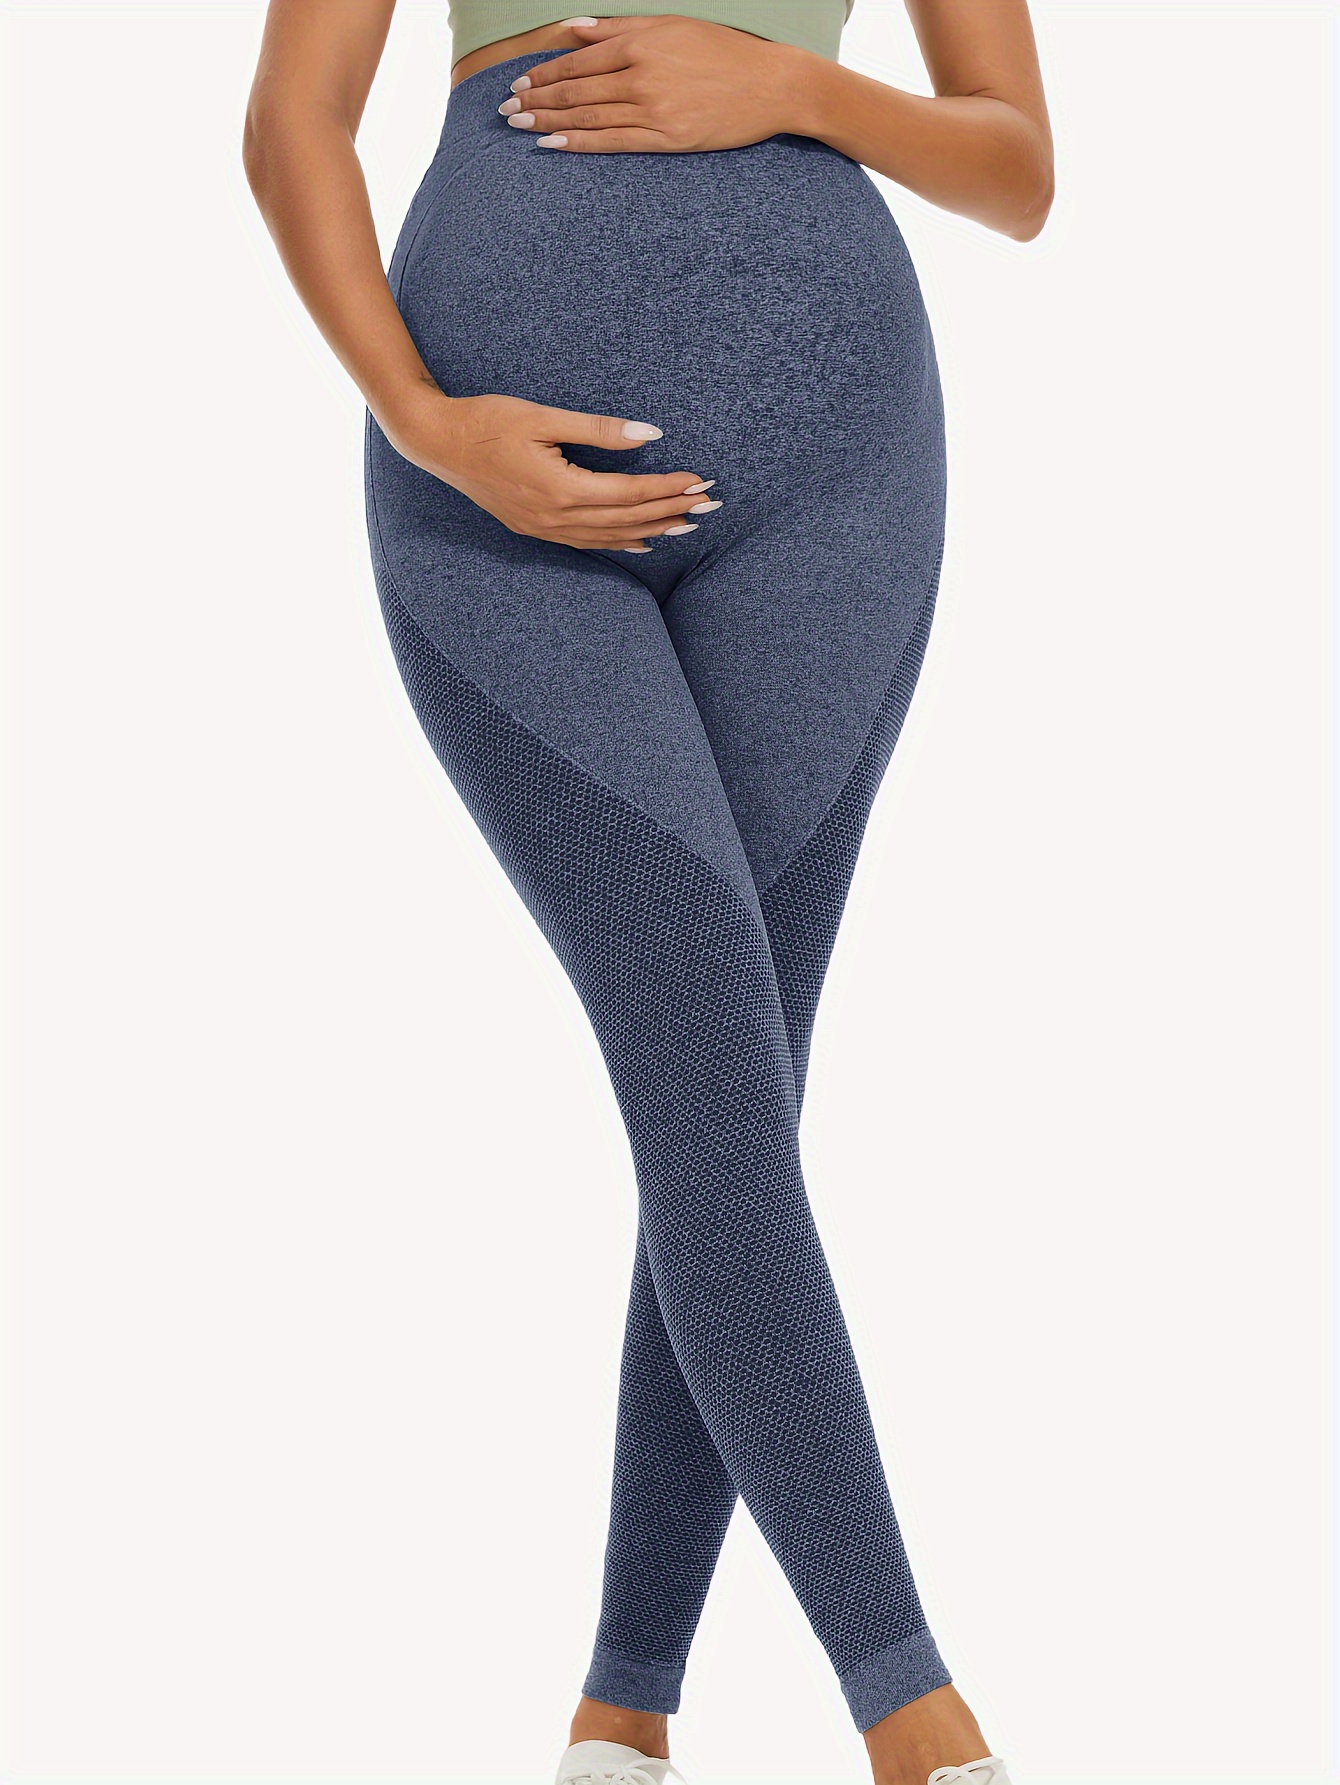 HEGALY Women's Maternity Flare Leggings Over The Belly - Casual Pregnancy Yoga  Pants with Pockets Buttery Soft Teal Blue, Teal Blue, XL : Buy Online at  Best Price in KSA - Souq